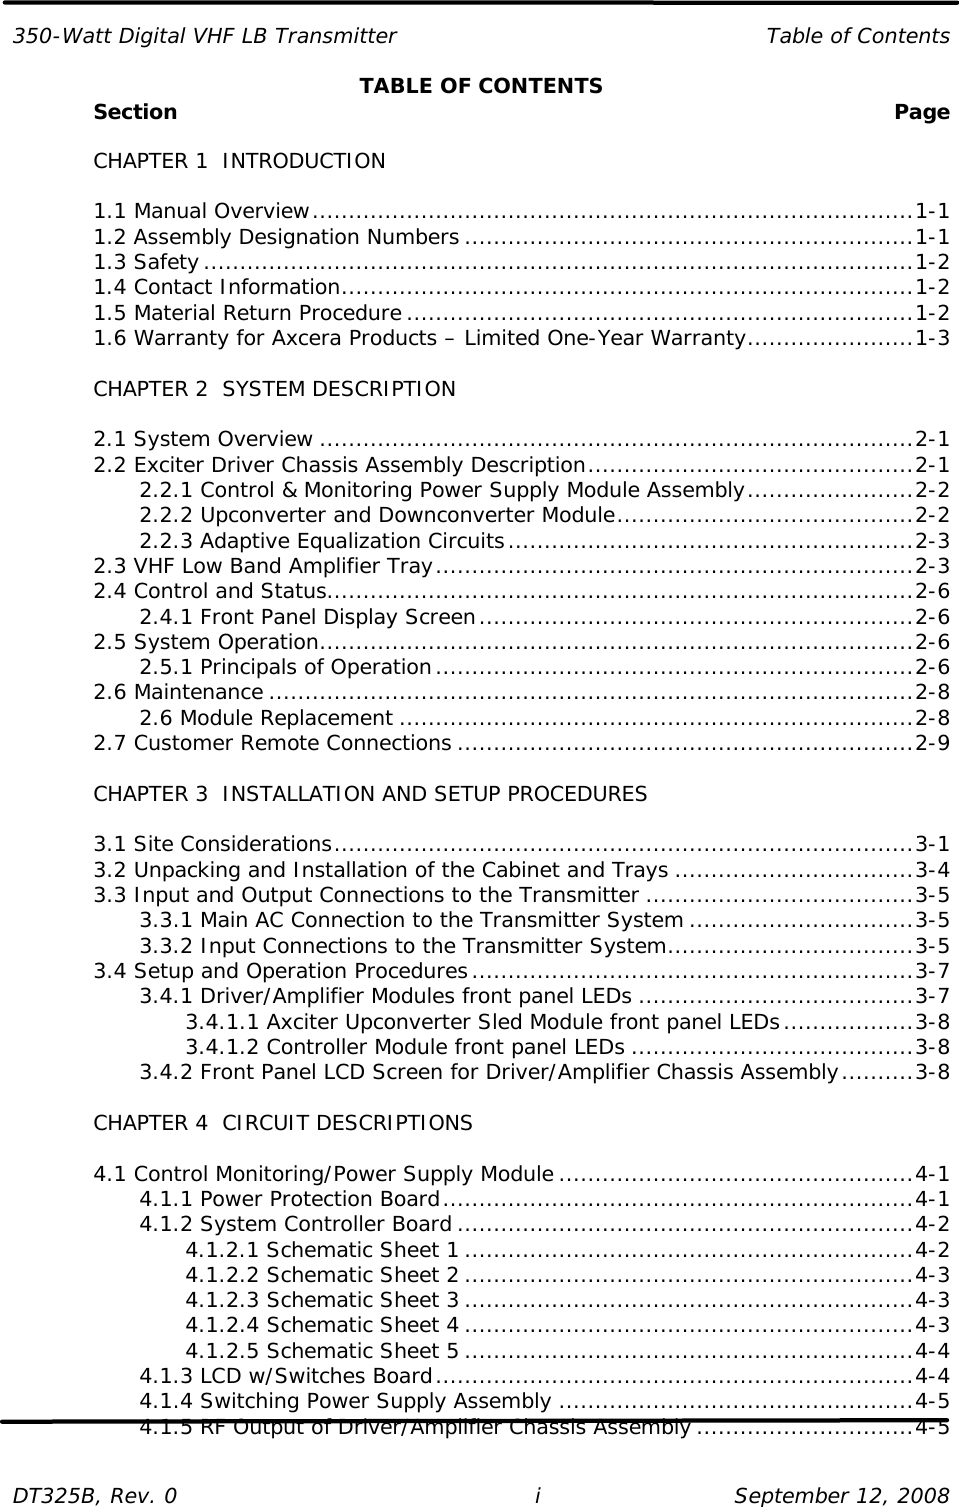 350-Watt Digital VHF LB Transmitter Table of Contents  DT325B, Rev. 0 i   September 12, 2008 TABLE OF CONTENTS  Section   Page   CHAPTER 1  INTRODUCTION   1.1 Manual Overview...................................................................................1-1  1.2 Assembly Designation Numbers ..............................................................1-1  1.3 Safety..................................................................................................1-2  1.4 Contact Information...............................................................................1-2  1.5 Material Return Procedure ......................................................................1-2  1.6 Warranty for Axcera Products – Limited One-Year Warranty.......................1-3   CHAPTER 2  SYSTEM DESCRIPTION   2.1 System Overview ..................................................................................2-1  2.2 Exciter Driver Chassis Assembly Description.............................................2-1     2.2.1 Control &amp; Monitoring Power Supply Module Assembly.......................2-2     2.2.2 Upconverter and Downconverter Module.........................................2-2     2.2.3 Adaptive Equalization Circuits........................................................2-3  2.3 VHF Low Band Amplifier Tray..................................................................2-3  2.4 Control and Status.................................................................................2-6     2.4.1 Front Panel Display Screen............................................................2-6  2.5 System Operation..................................................................................2-6     2.5.1 Principals of Operation..................................................................2-6  2.6 Maintenance .........................................................................................2-8     2.6 Module Replacement .......................................................................2-8  2.7 Customer Remote Connections ...............................................................2-9   CHAPTER 3  INSTALLATION AND SETUP PROCEDURES     3.1 Site Considerations................................................................................3-1  3.2 Unpacking and Installation of the Cabinet and Trays .................................3-4  3.3 Input and Output Connections to the Transmitter .....................................3-5     3.3.1 Main AC Connection to the Transmitter System ...............................3-5     3.3.2 Input Connections to the Transmitter System..................................3-5  3.4 Setup and Operation Procedures.............................................................3-7     3.4.1 Driver/Amplifier Modules front panel LEDs ......................................3-7     3.4.1.1 Axciter Upconverter Sled Module front panel LEDs..................3-8     3.4.1.2 Controller Module front panel LEDs .......................................3-8     3.4.2 Front Panel LCD Screen for Driver/Amplifier Chassis Assembly..........3-8   CHAPTER 4  CIRCUIT DESCRIPTIONS   4.1 Control Monitoring/Power Supply Module .................................................4-1     4.1.1 Power Protection Board.................................................................4-1     4.1.2 System Controller Board ...............................................................4-2     4.1.2.1 Schematic Sheet 1 ..............................................................4-2     4.1.2.2 Schematic Sheet 2 ..............................................................4-3     4.1.2.3 Schematic Sheet 3 ..............................................................4-3     4.1.2.4 Schematic Sheet 4 ..............................................................4-3     4.1.2.5 Schematic Sheet 5 ..............................................................4-4     4.1.3 LCD w/Switches Board..................................................................4-4     4.1.4 Switching Power Supply Assembly .................................................4-5     4.1.5 RF Output of Driver/Amplifier Chassis Assembly ..............................4-5  